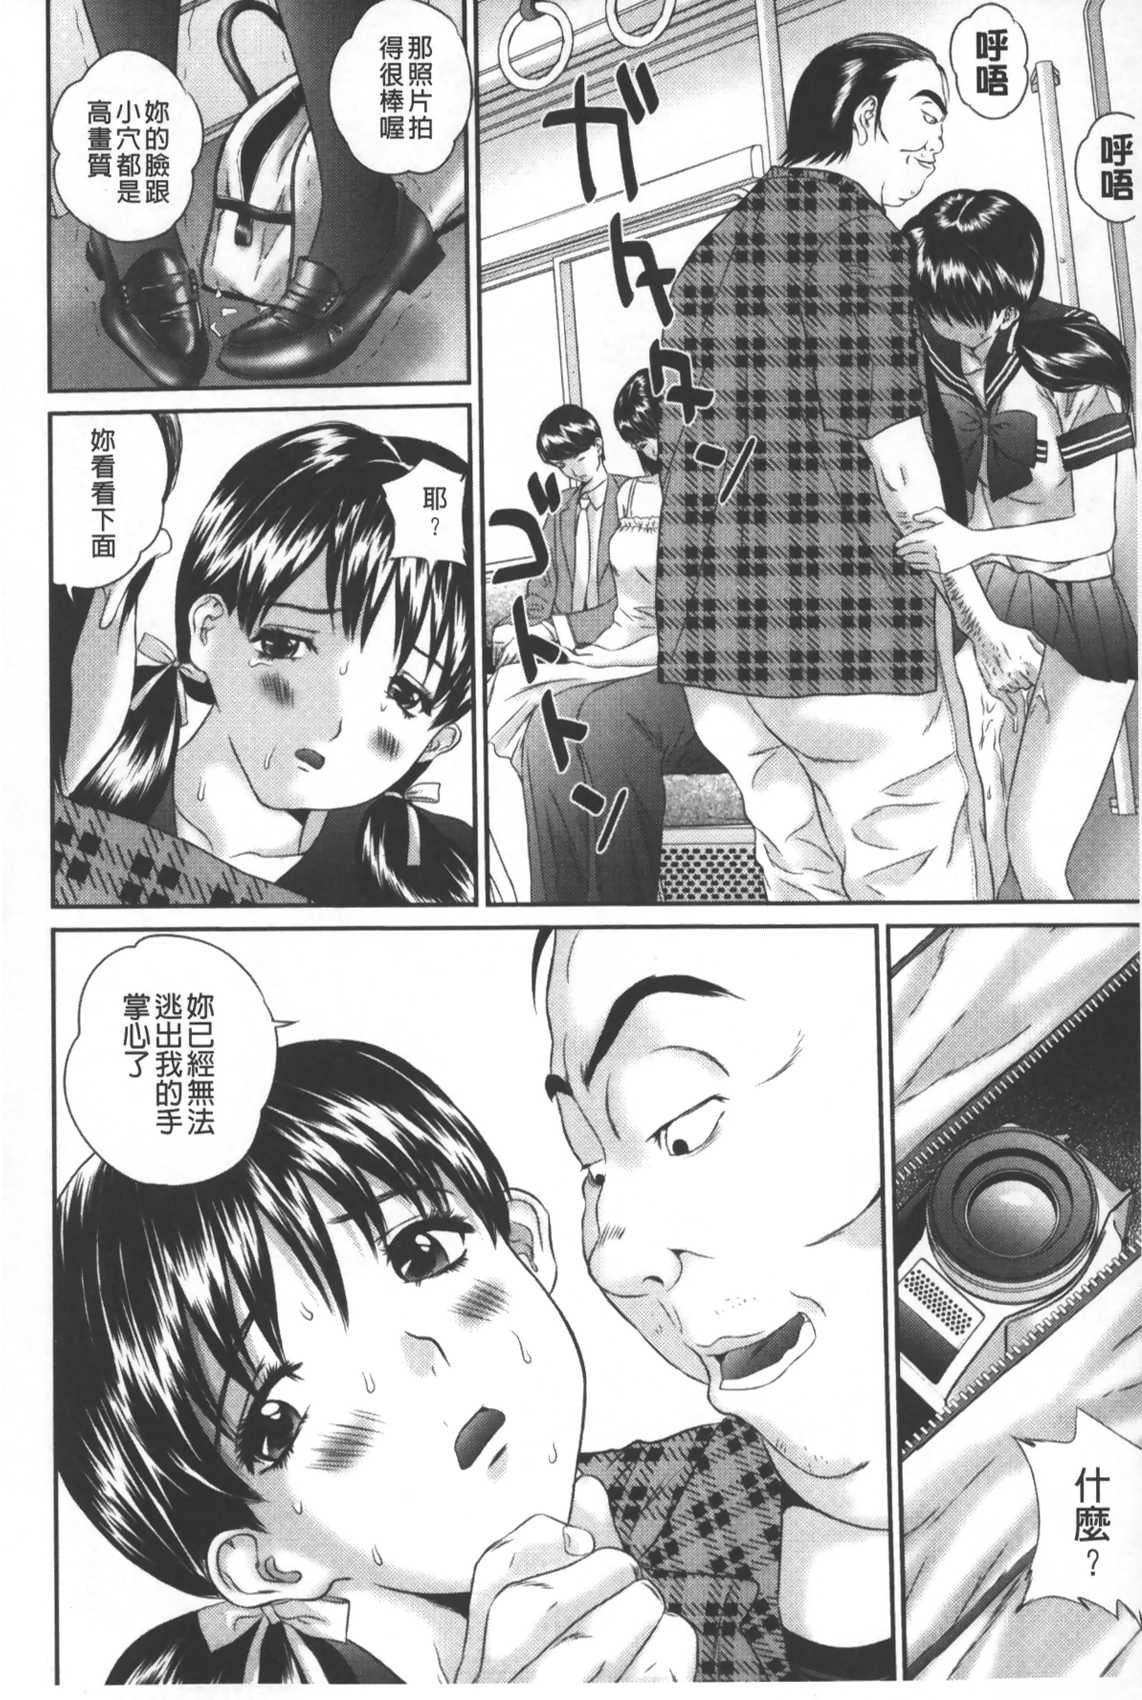 [Manzou] Tousatsu Collector | 盜拍題材精選集 [Chinese] page 11 full